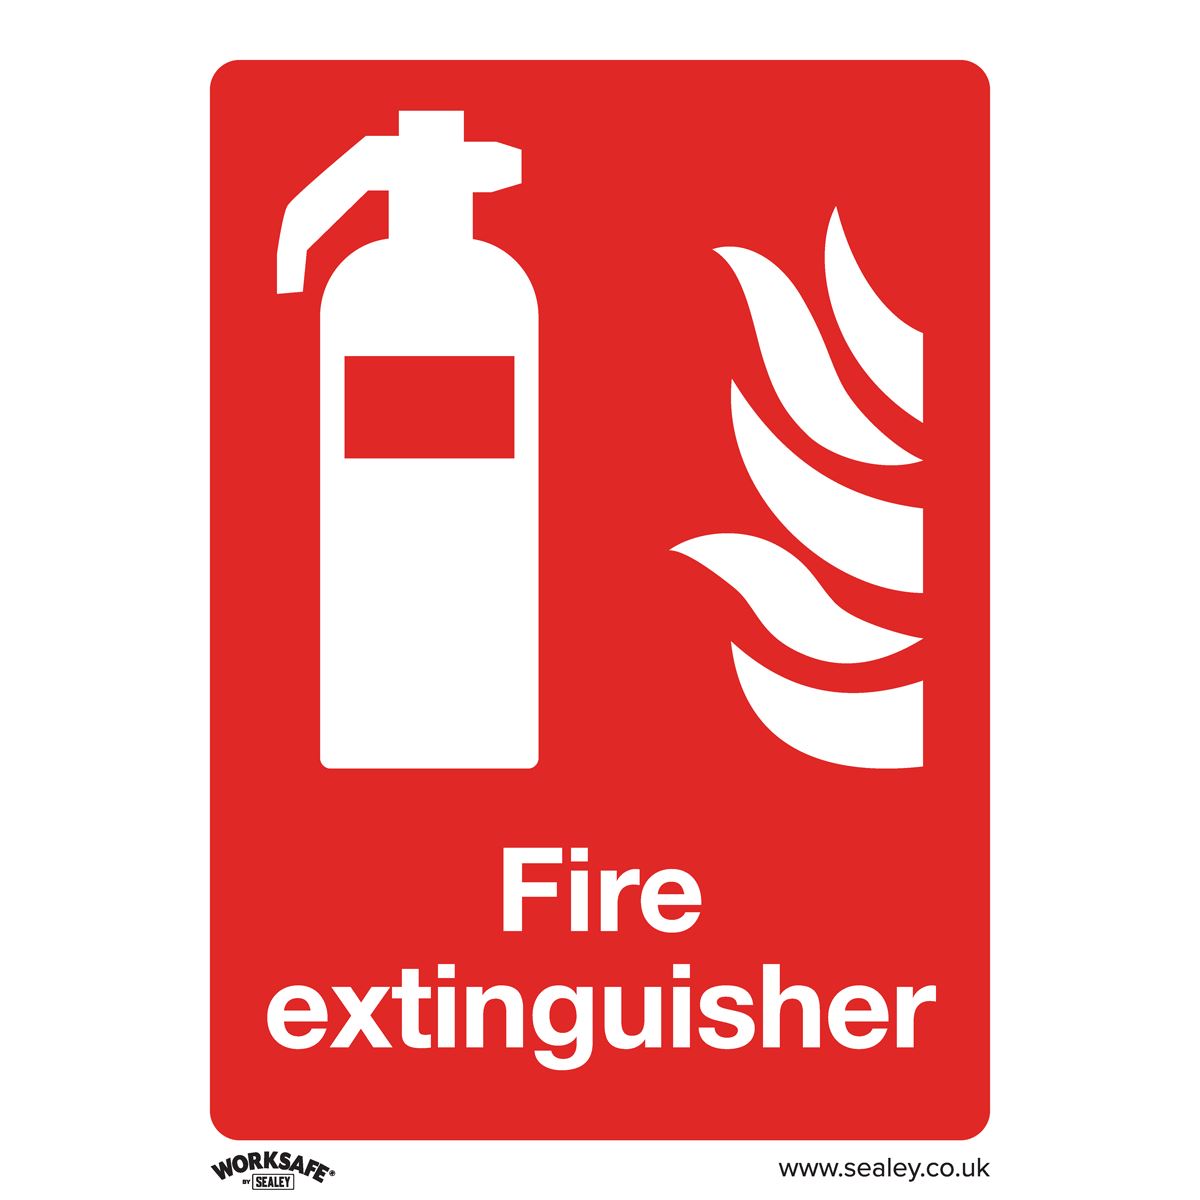 Worksafe by Sealey Prohibition Safety Sign - Fire Extinguisher - Rigid Plastic